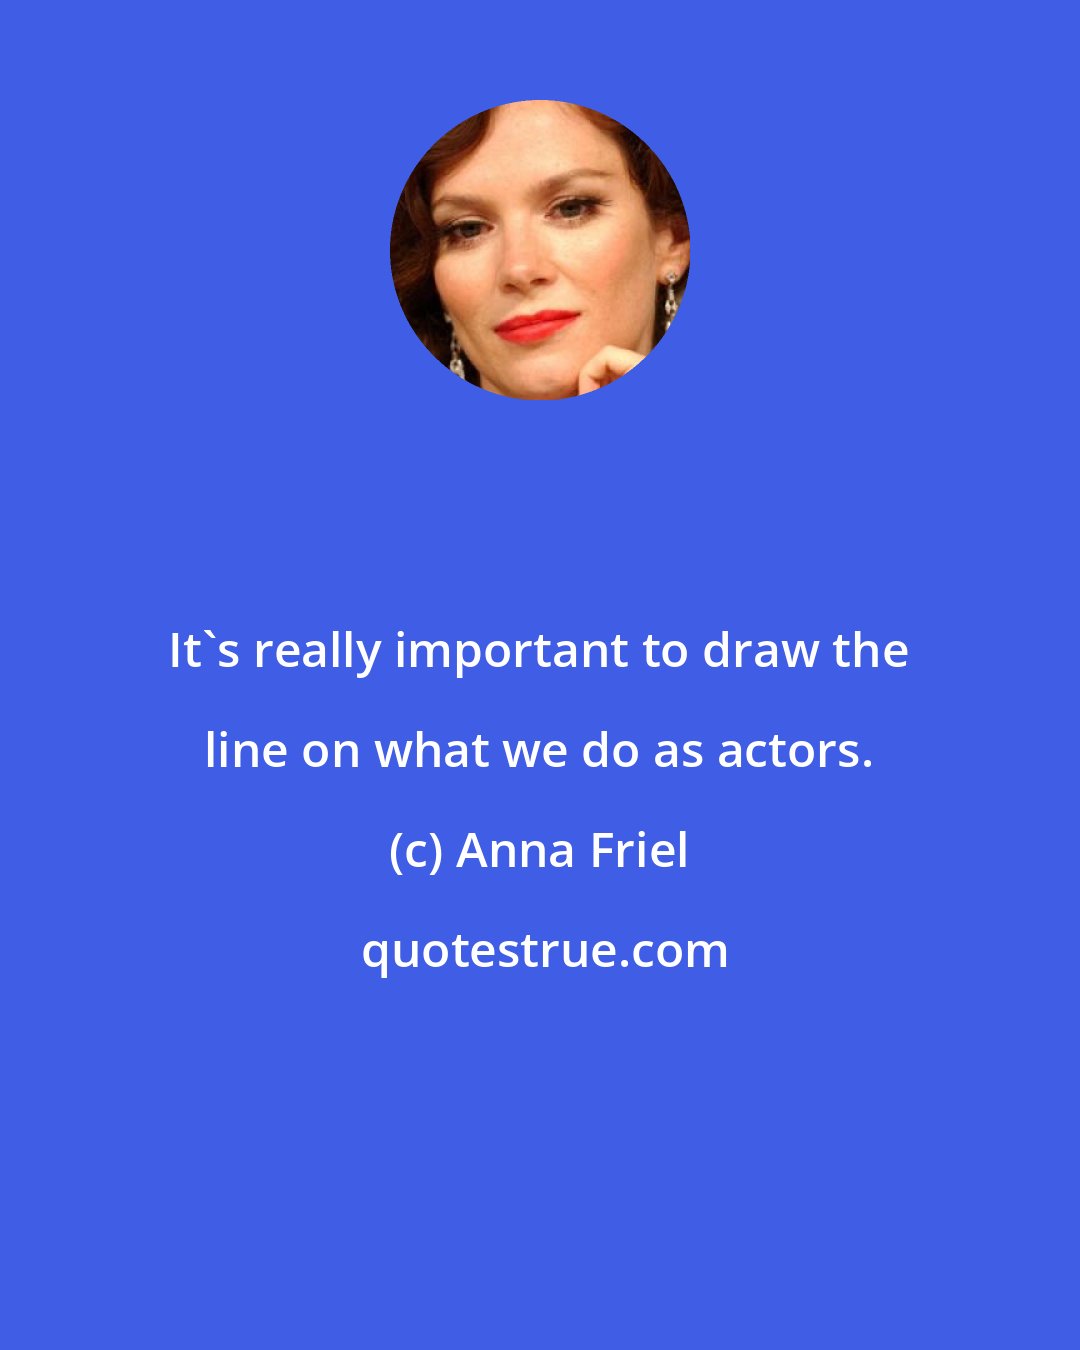 Anna Friel: It's really important to draw the line on what we do as actors.